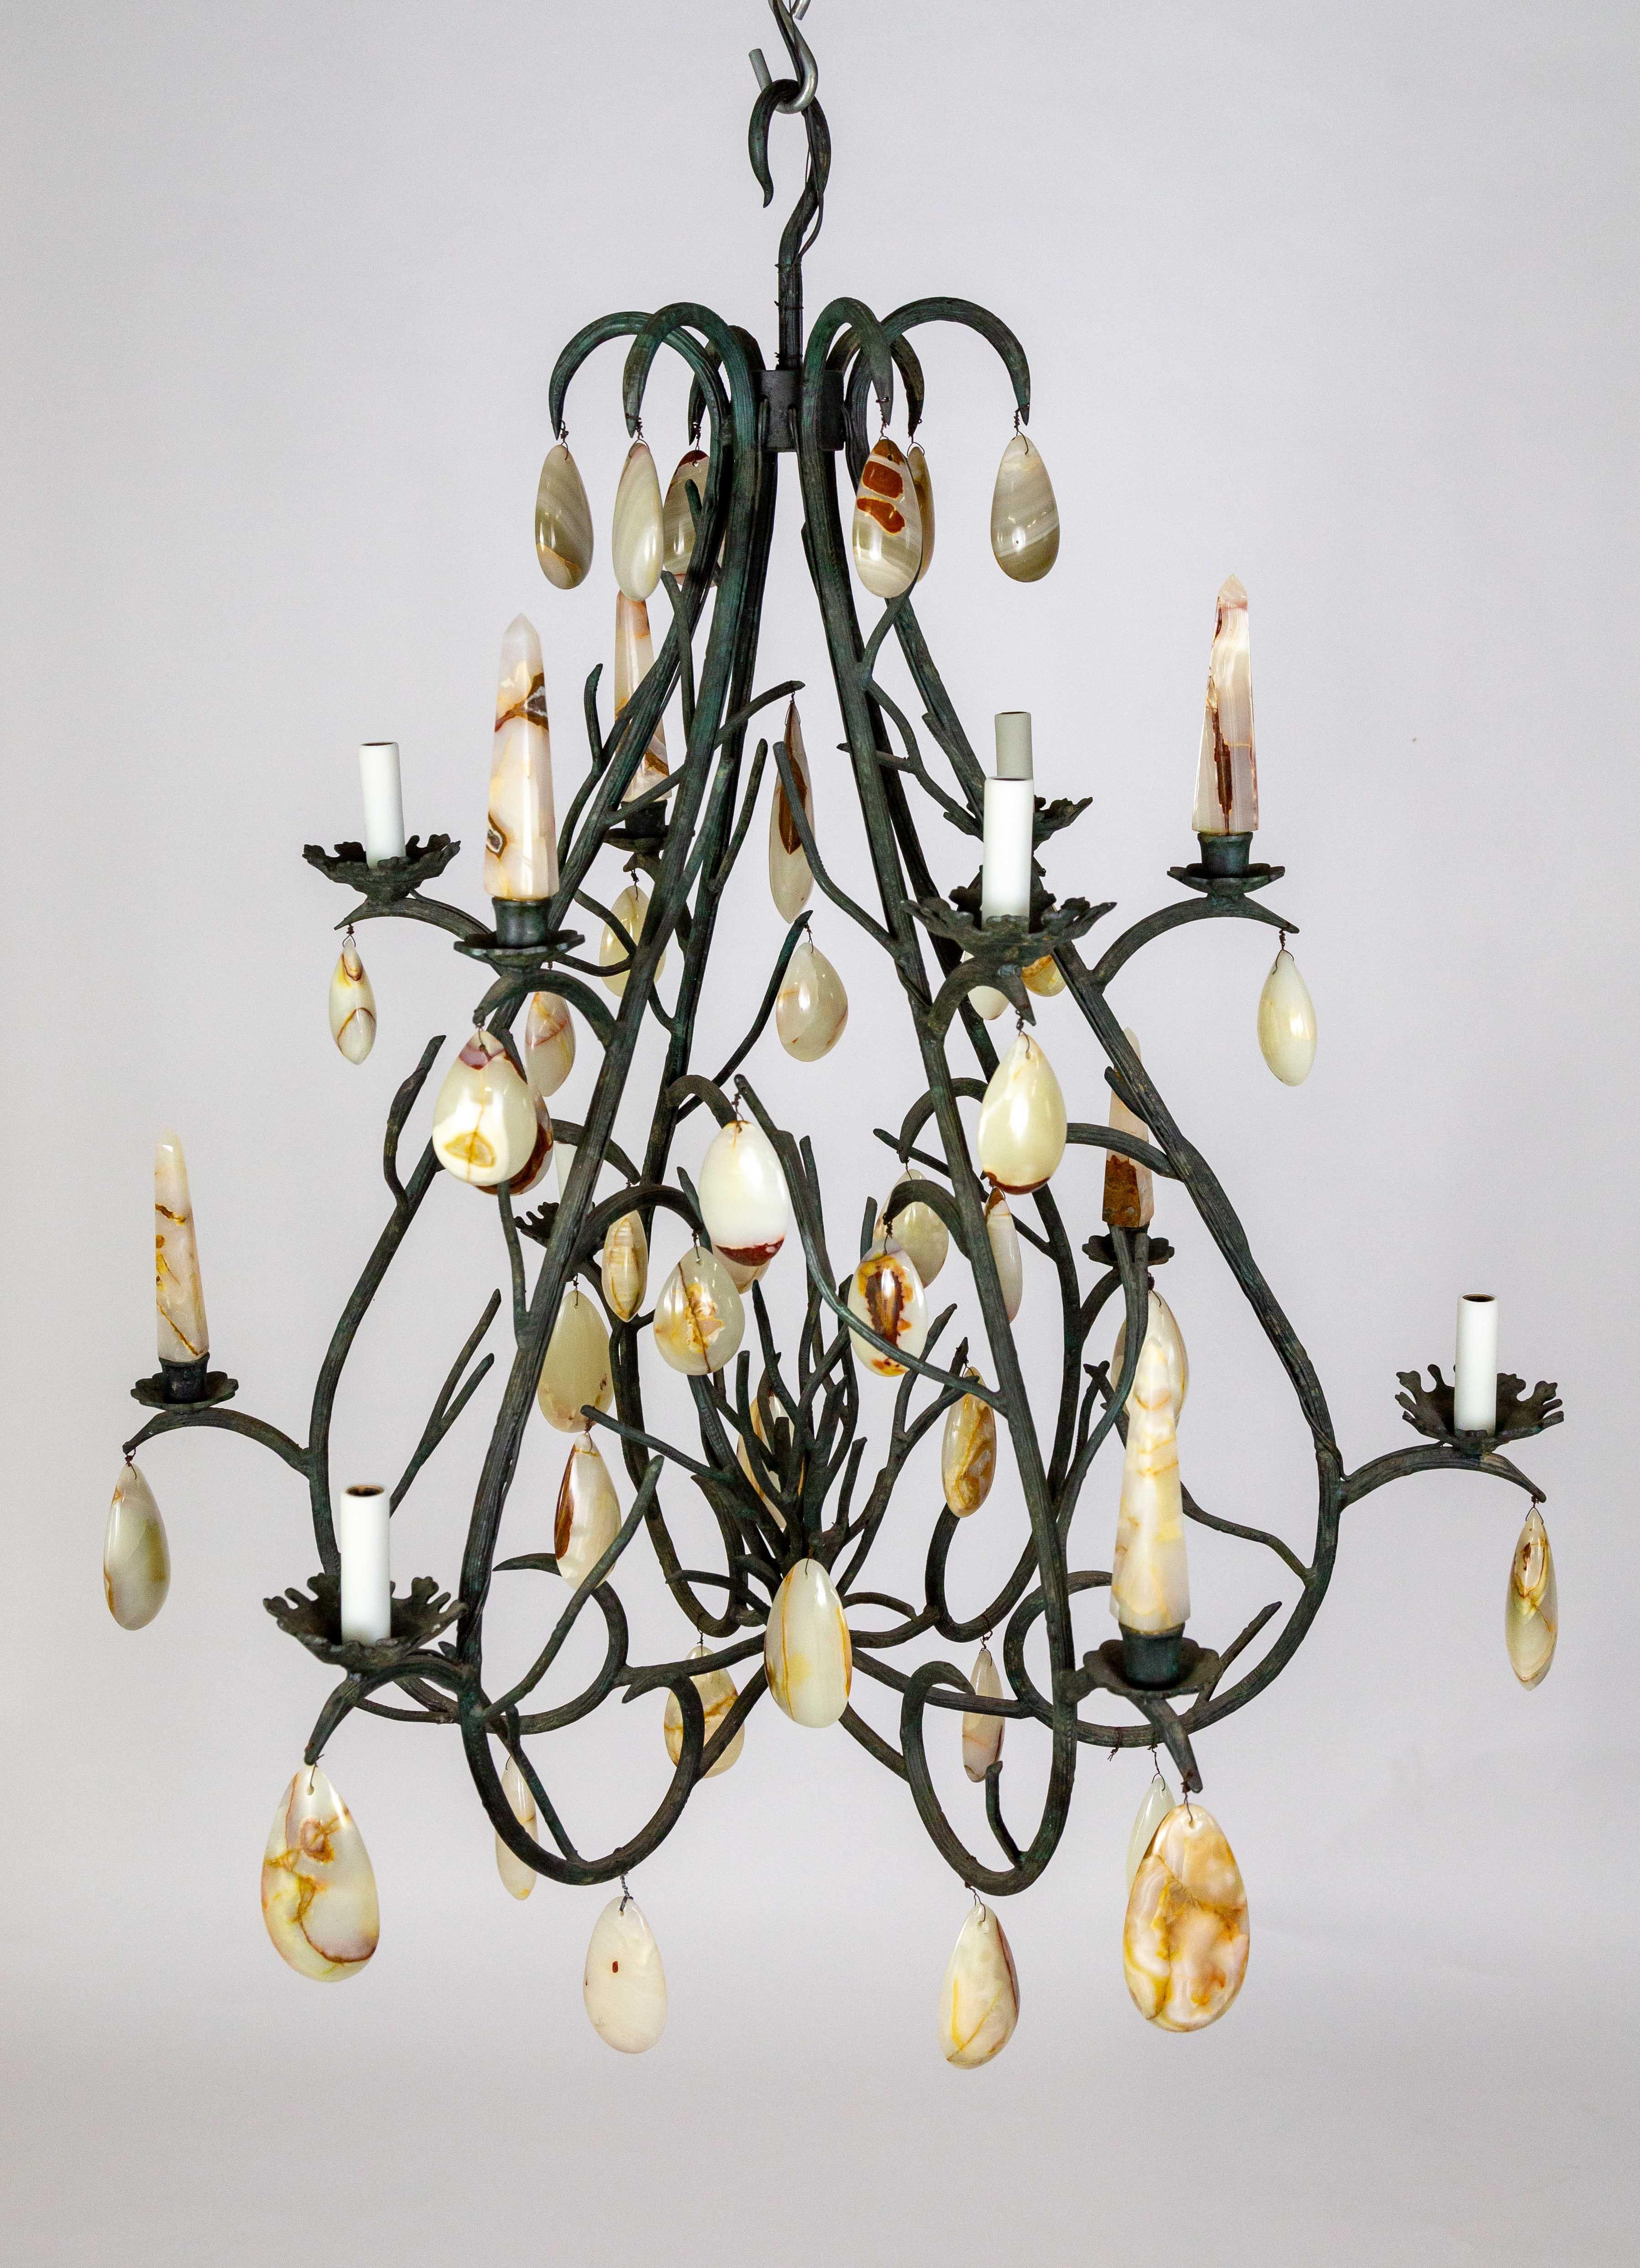 Giant Forest Green Branch Chandelier w/ Onyx Crystals by Luciano Tempo For Sale 7